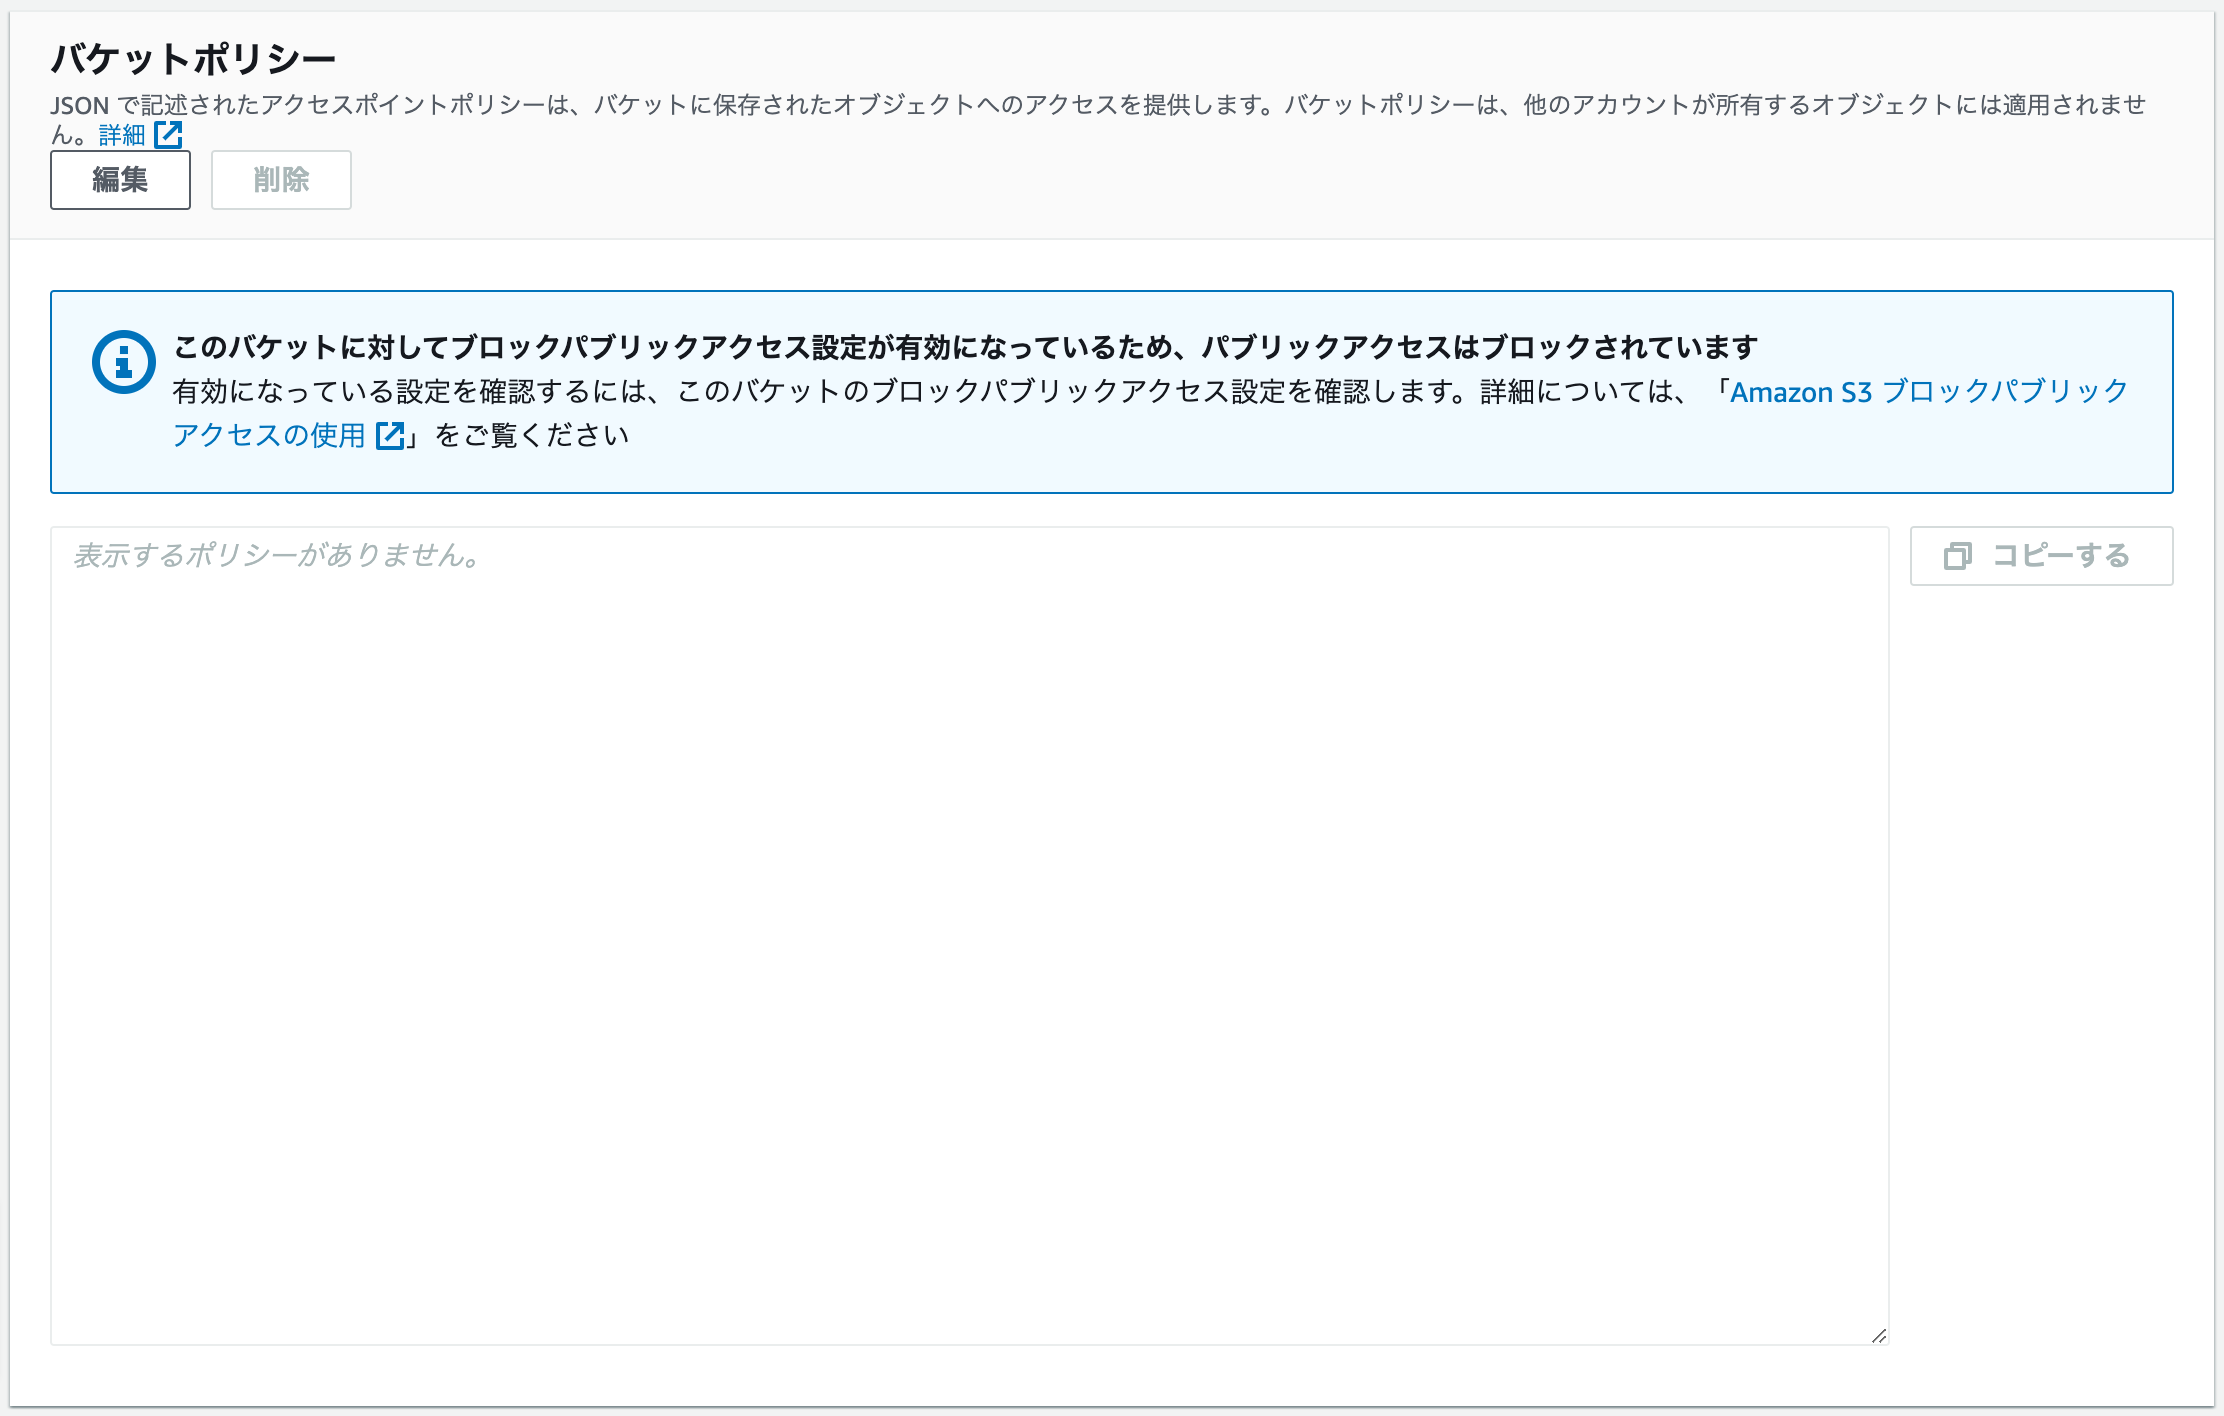 "AWS CloudFrontコンソール > バケットポリシー"